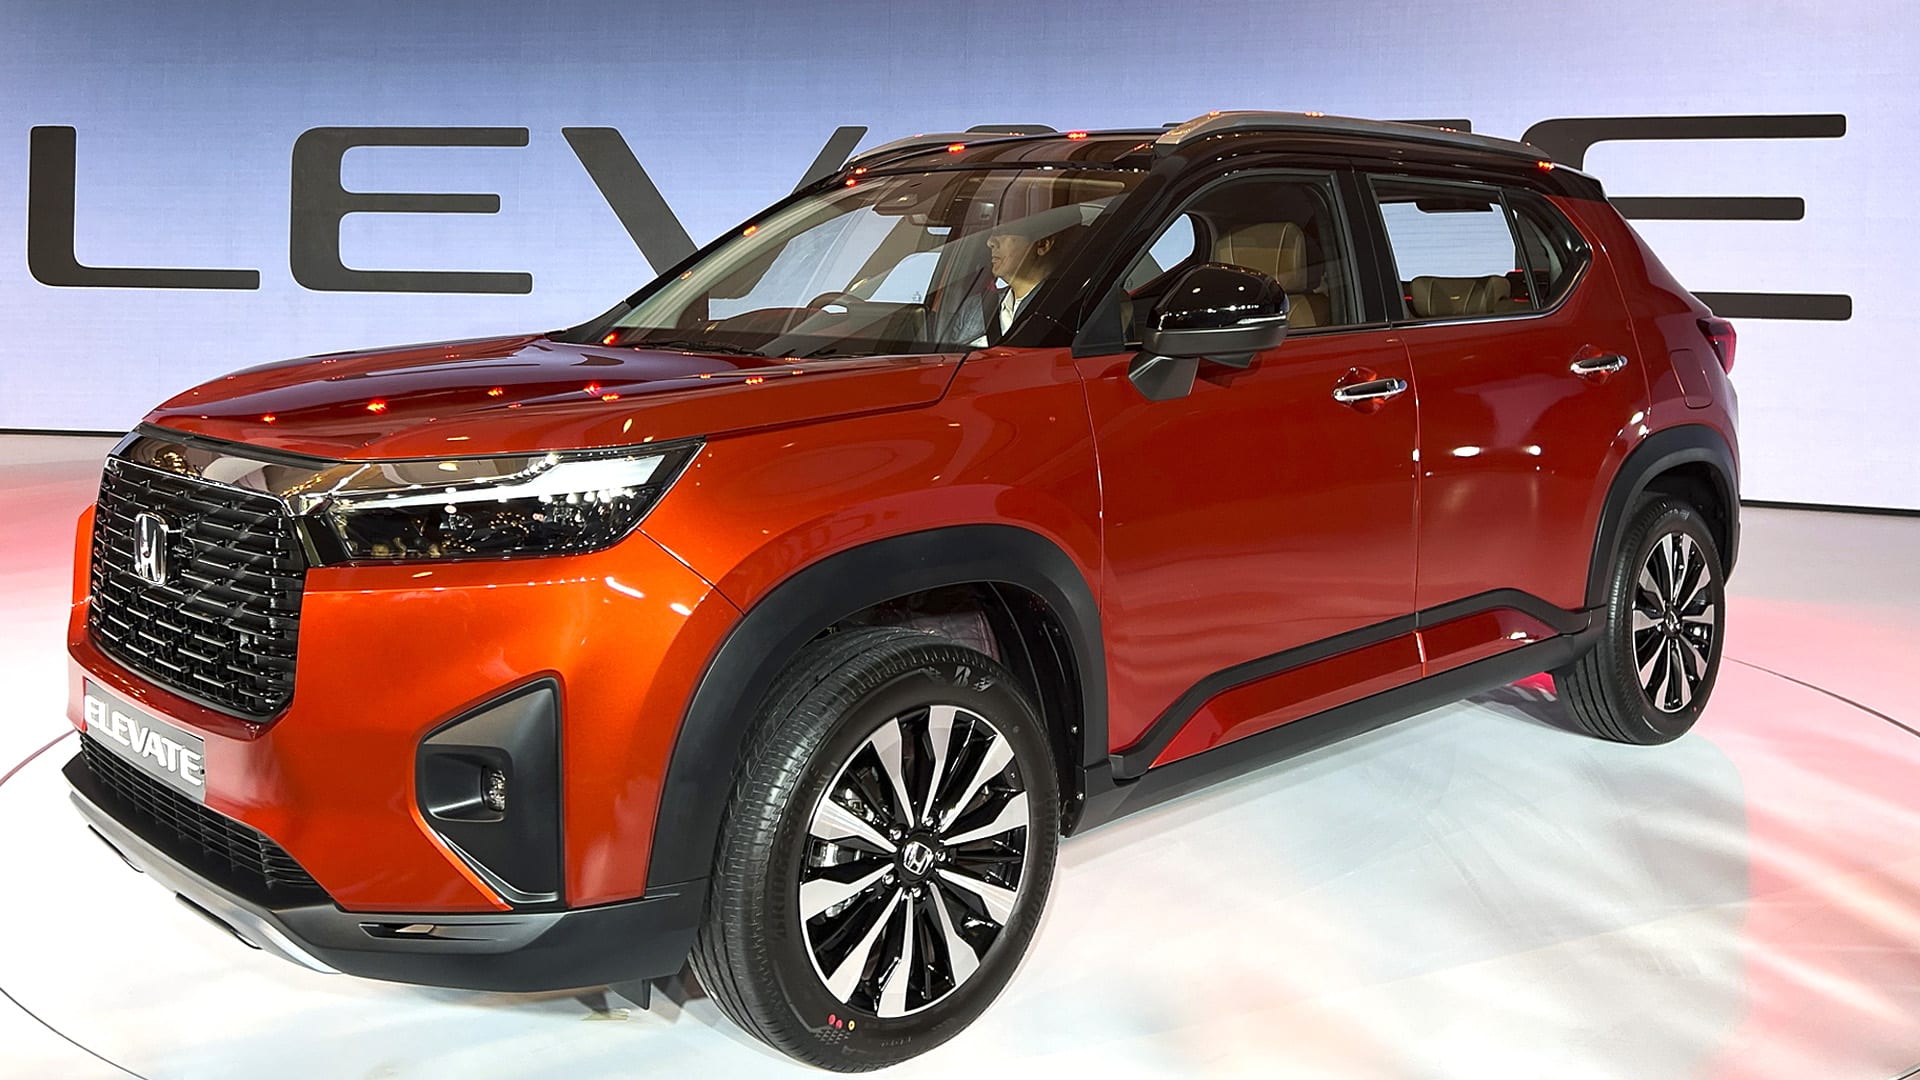 Honda opens bookings for upcoming SUV Elevate